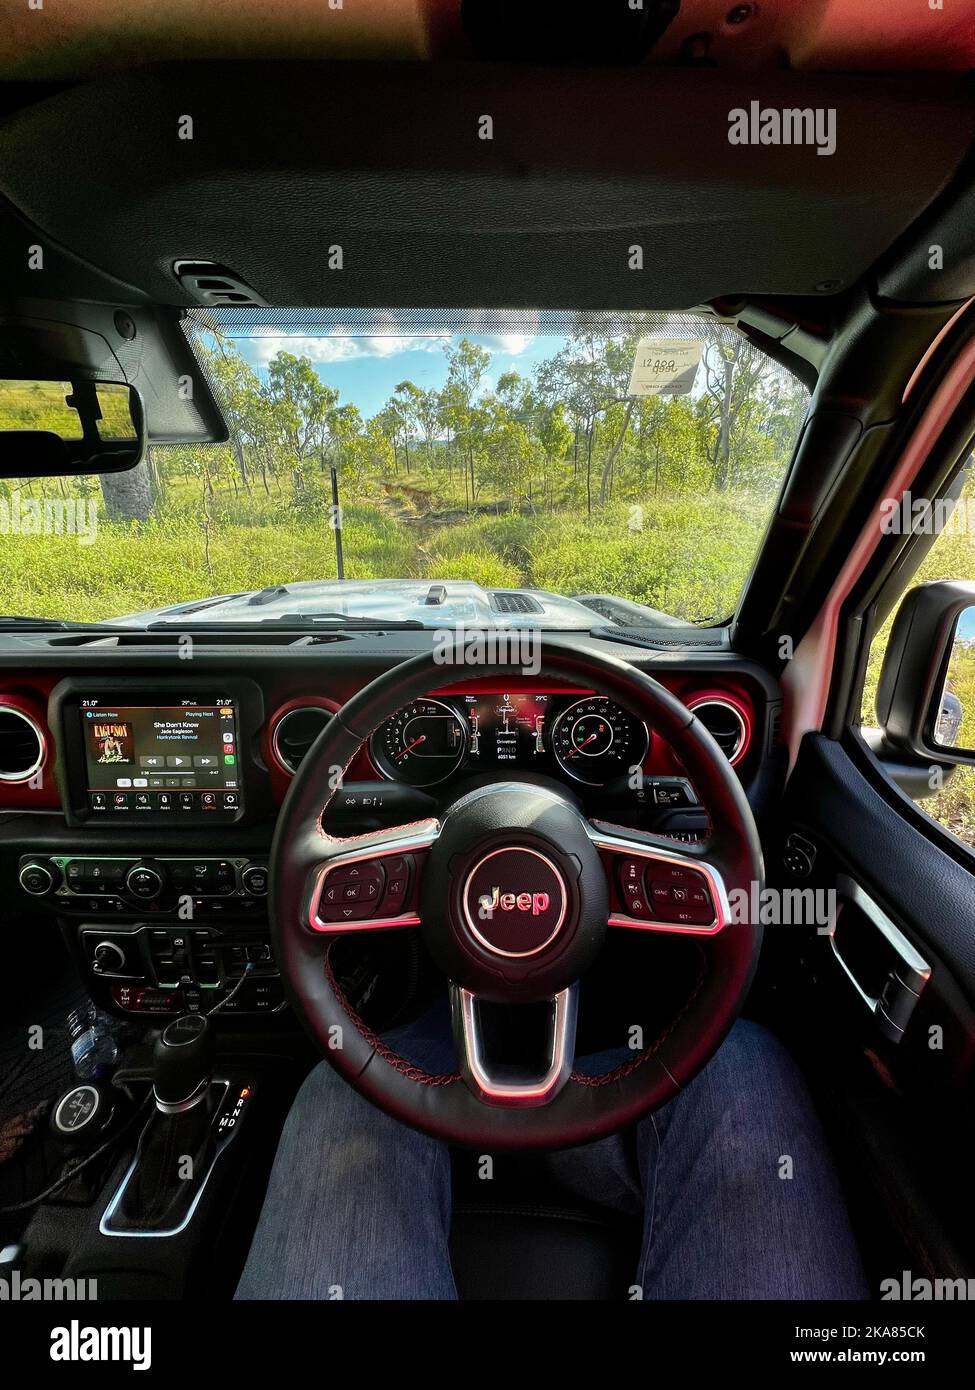 A vertical closeup of an interior of a Jeep car with its wheel and meter panel against palm trees Stock Photo